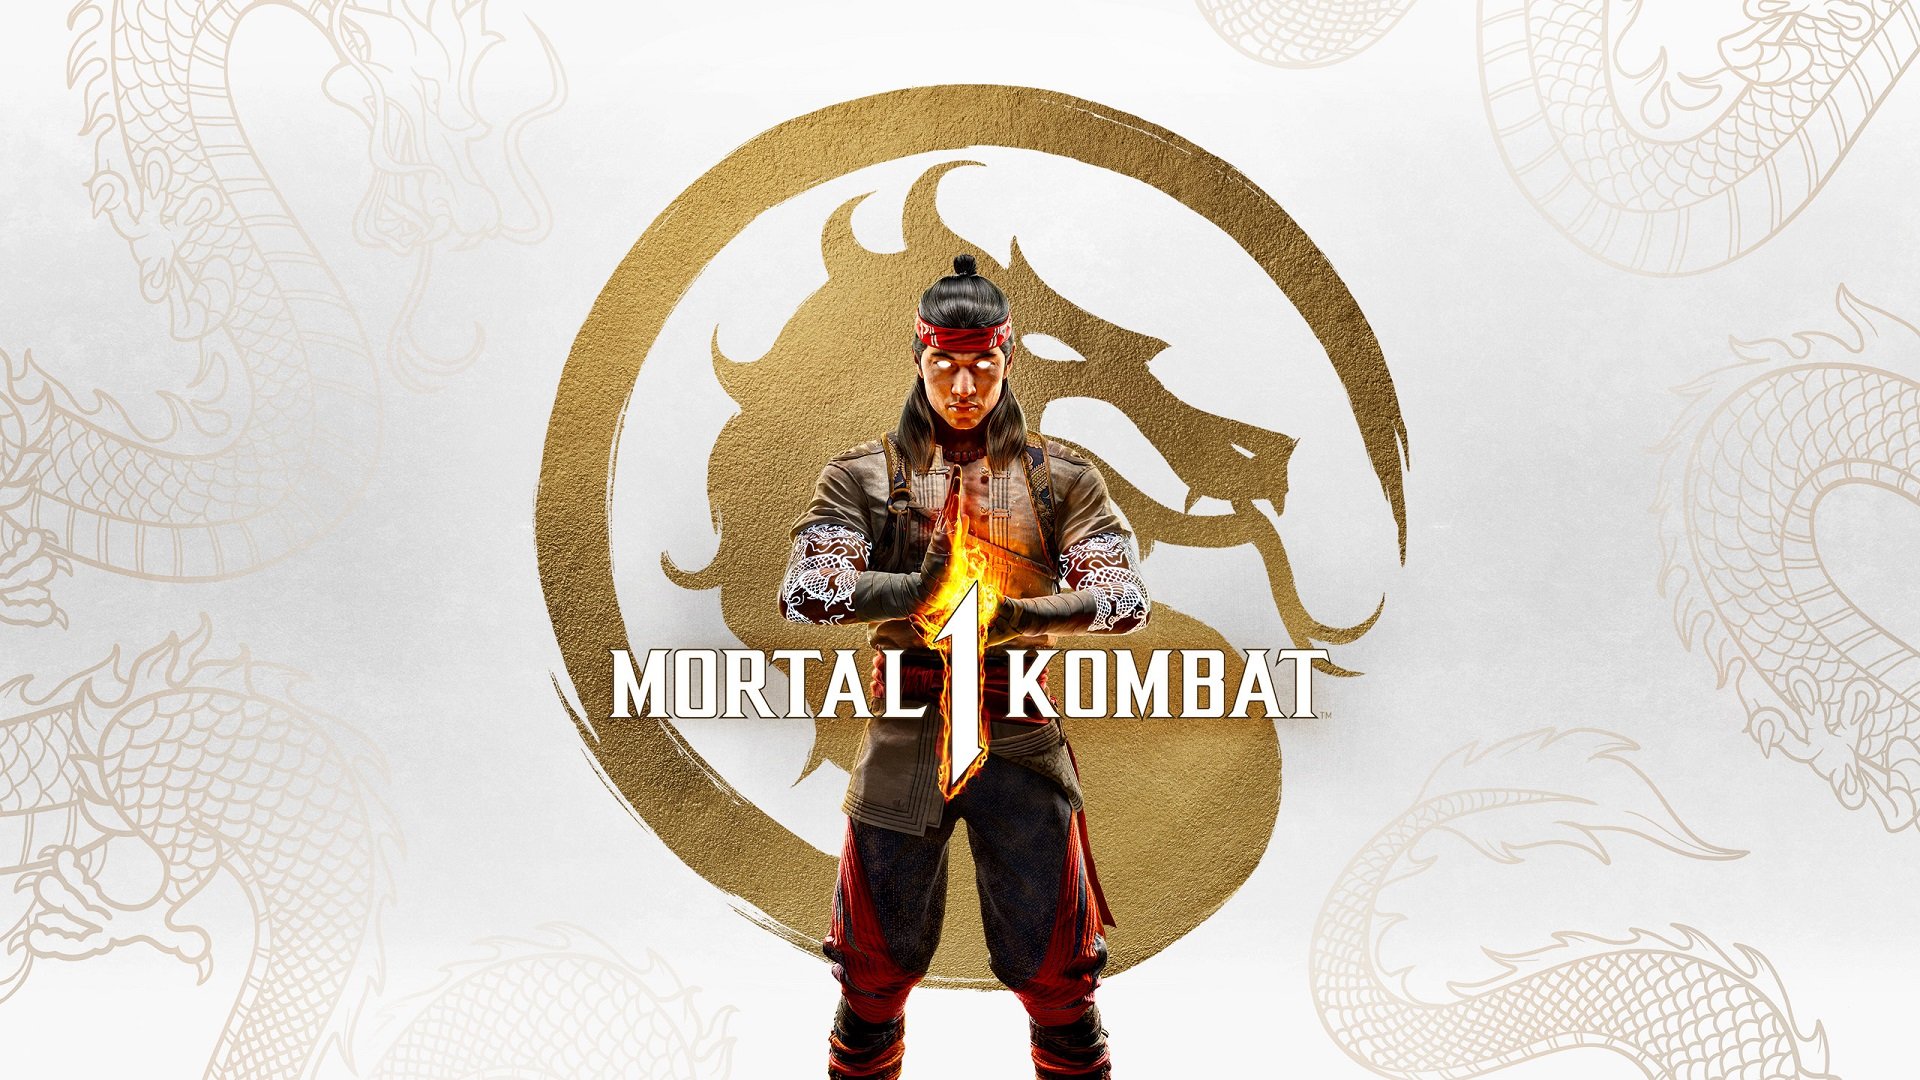 Can Mortal Kombat 1 Challenge Street Fighter 6 this Generation